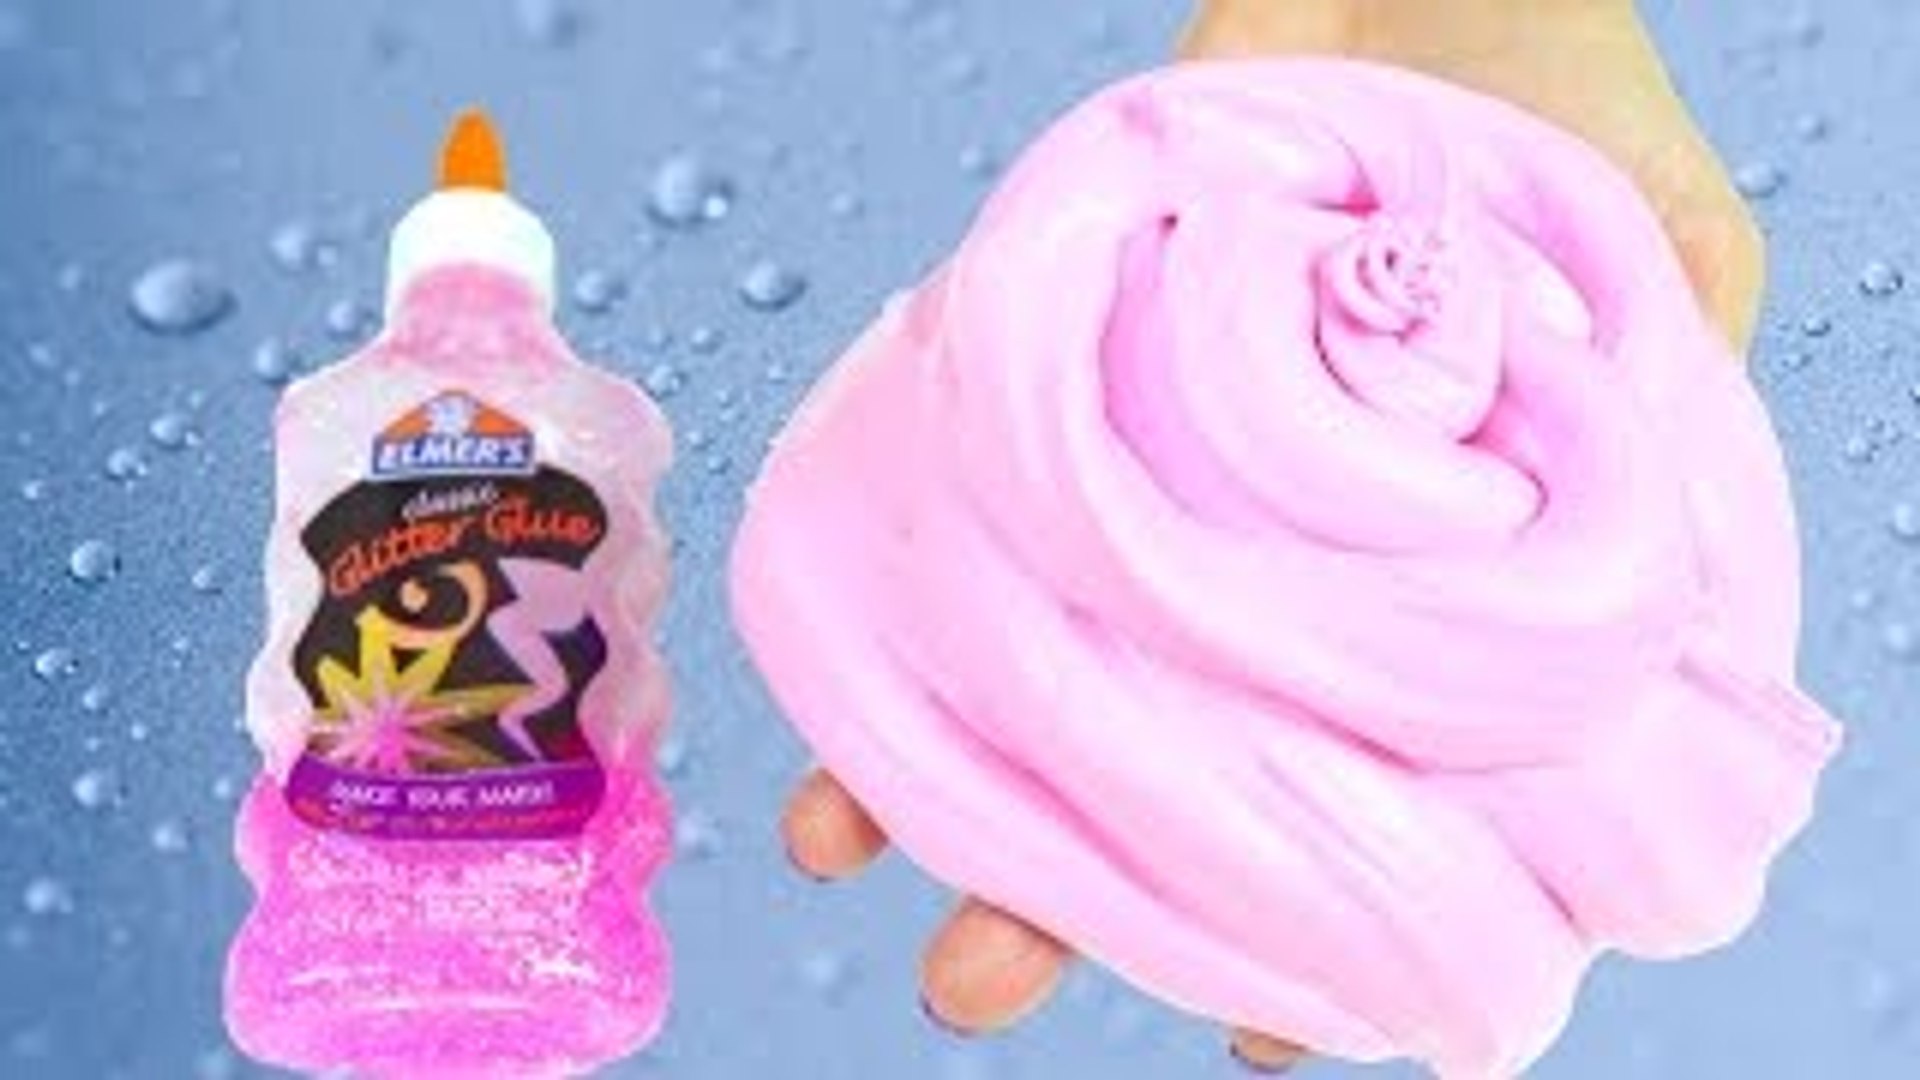 Elmers Glue Fluffy Slime Without Borax , How to Make Fluffy Slime With  Elmers Glue No Bo - Dailymotion Video